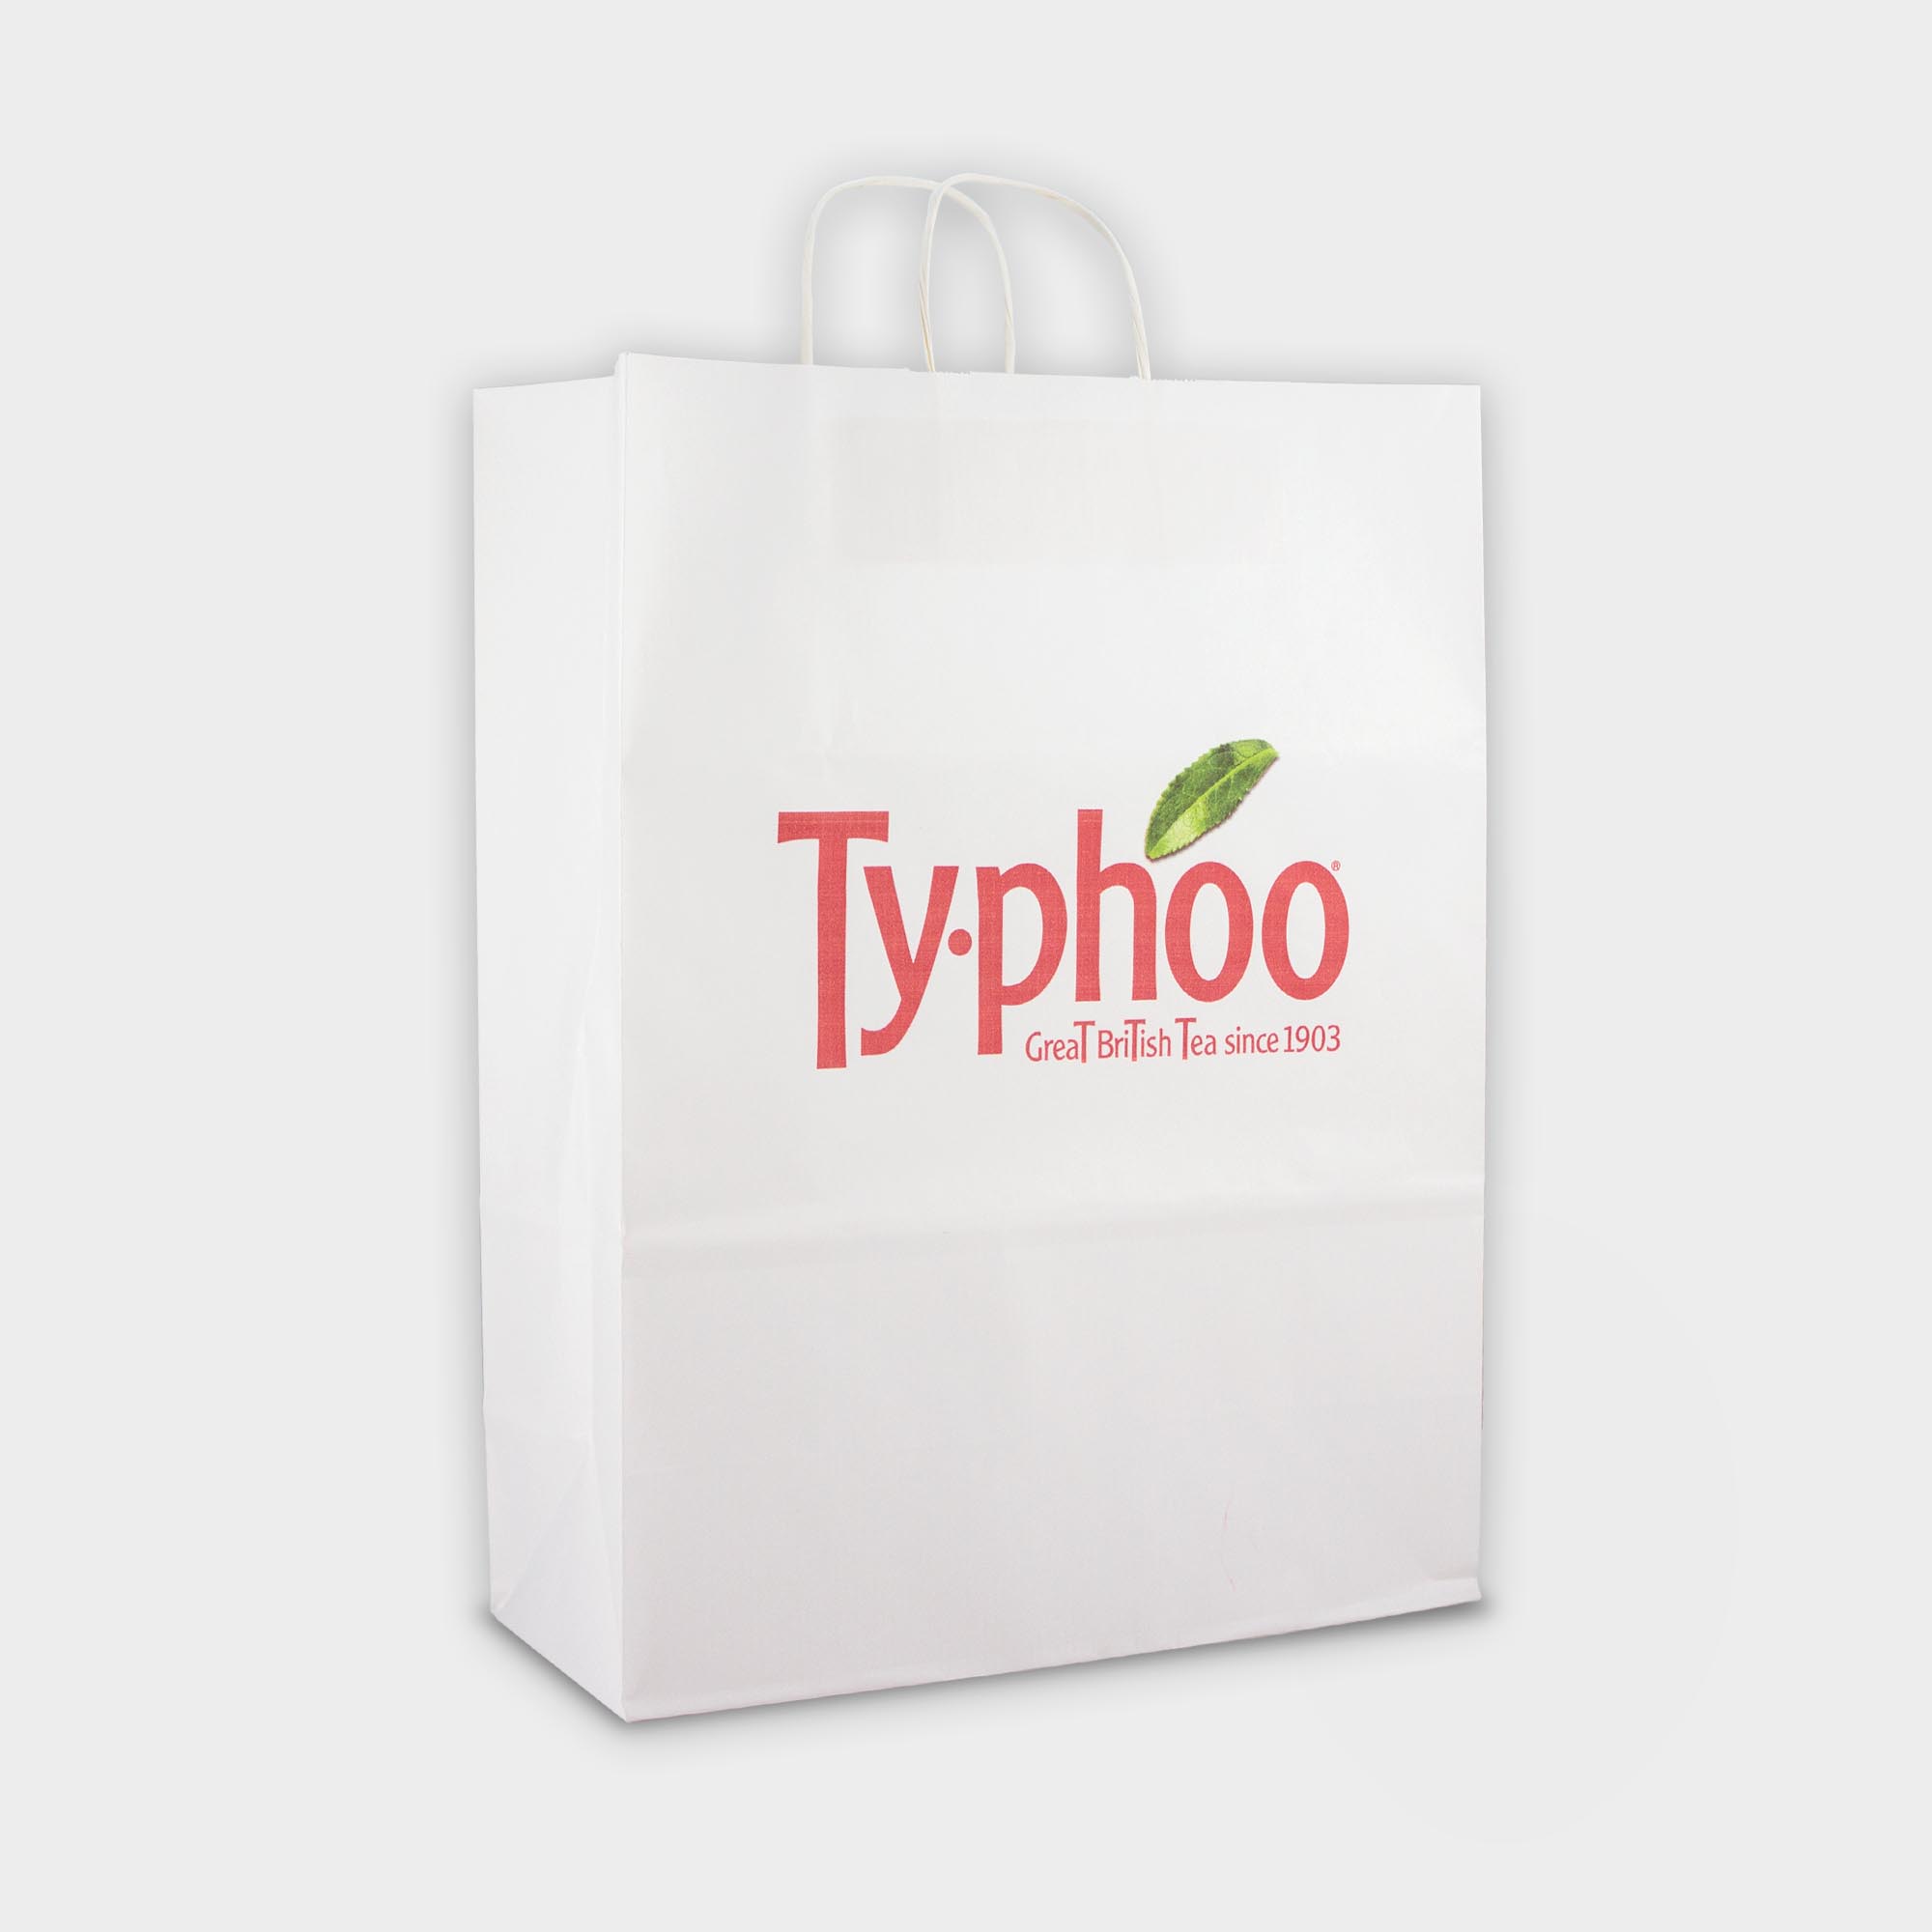 The Green & Good Large Carrier Paper Bag is perfect for boutiques, parties, trade shows and more. Comes with twist handle and is available in either brown or white. These are pre-made paper carrier bags and we can offer digital overprinting in 1 colour print (Black only) or 4 colour print to either 1 side or both.